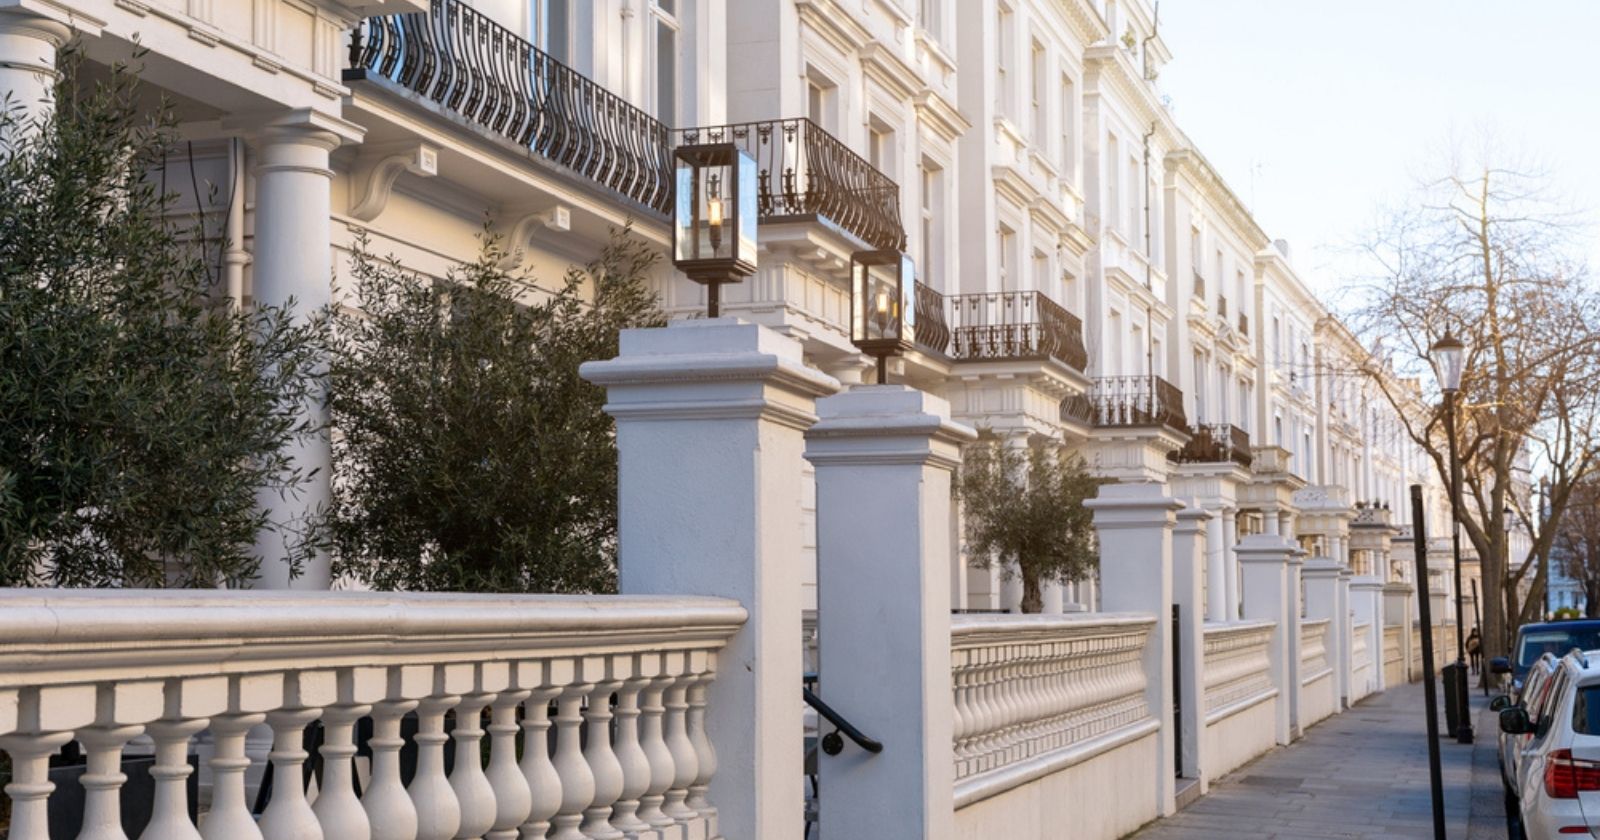 London: An anti-corruption collective decides to "liberate" Russian oligarchs' villas